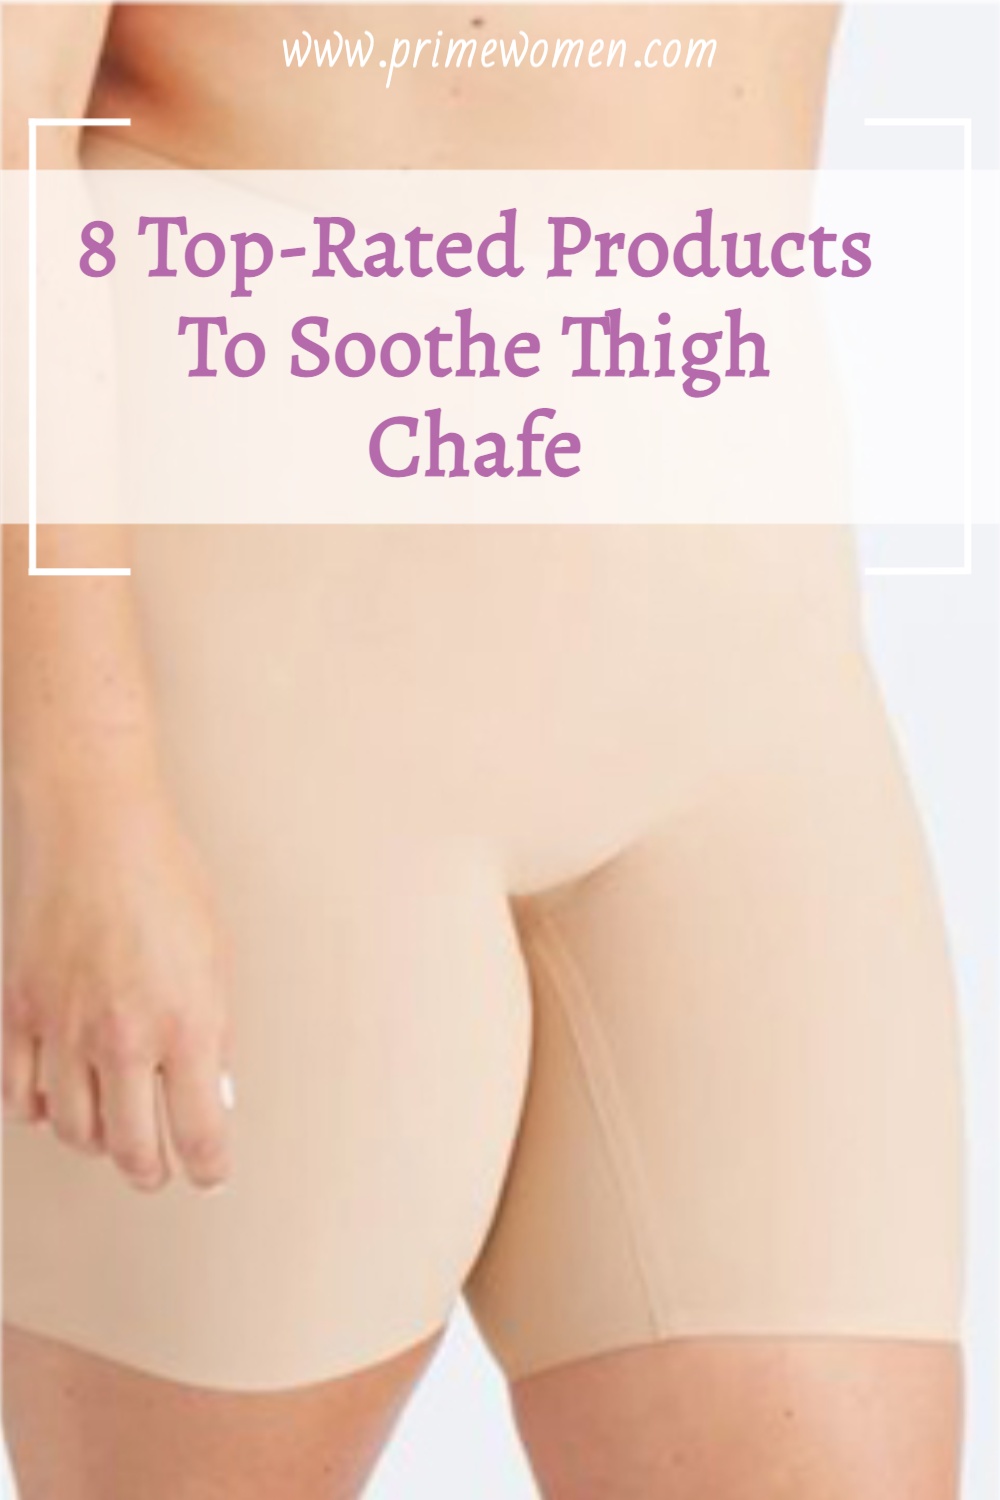 8-Top-Rated-Products-To-Soothe-Thigh-Chafe